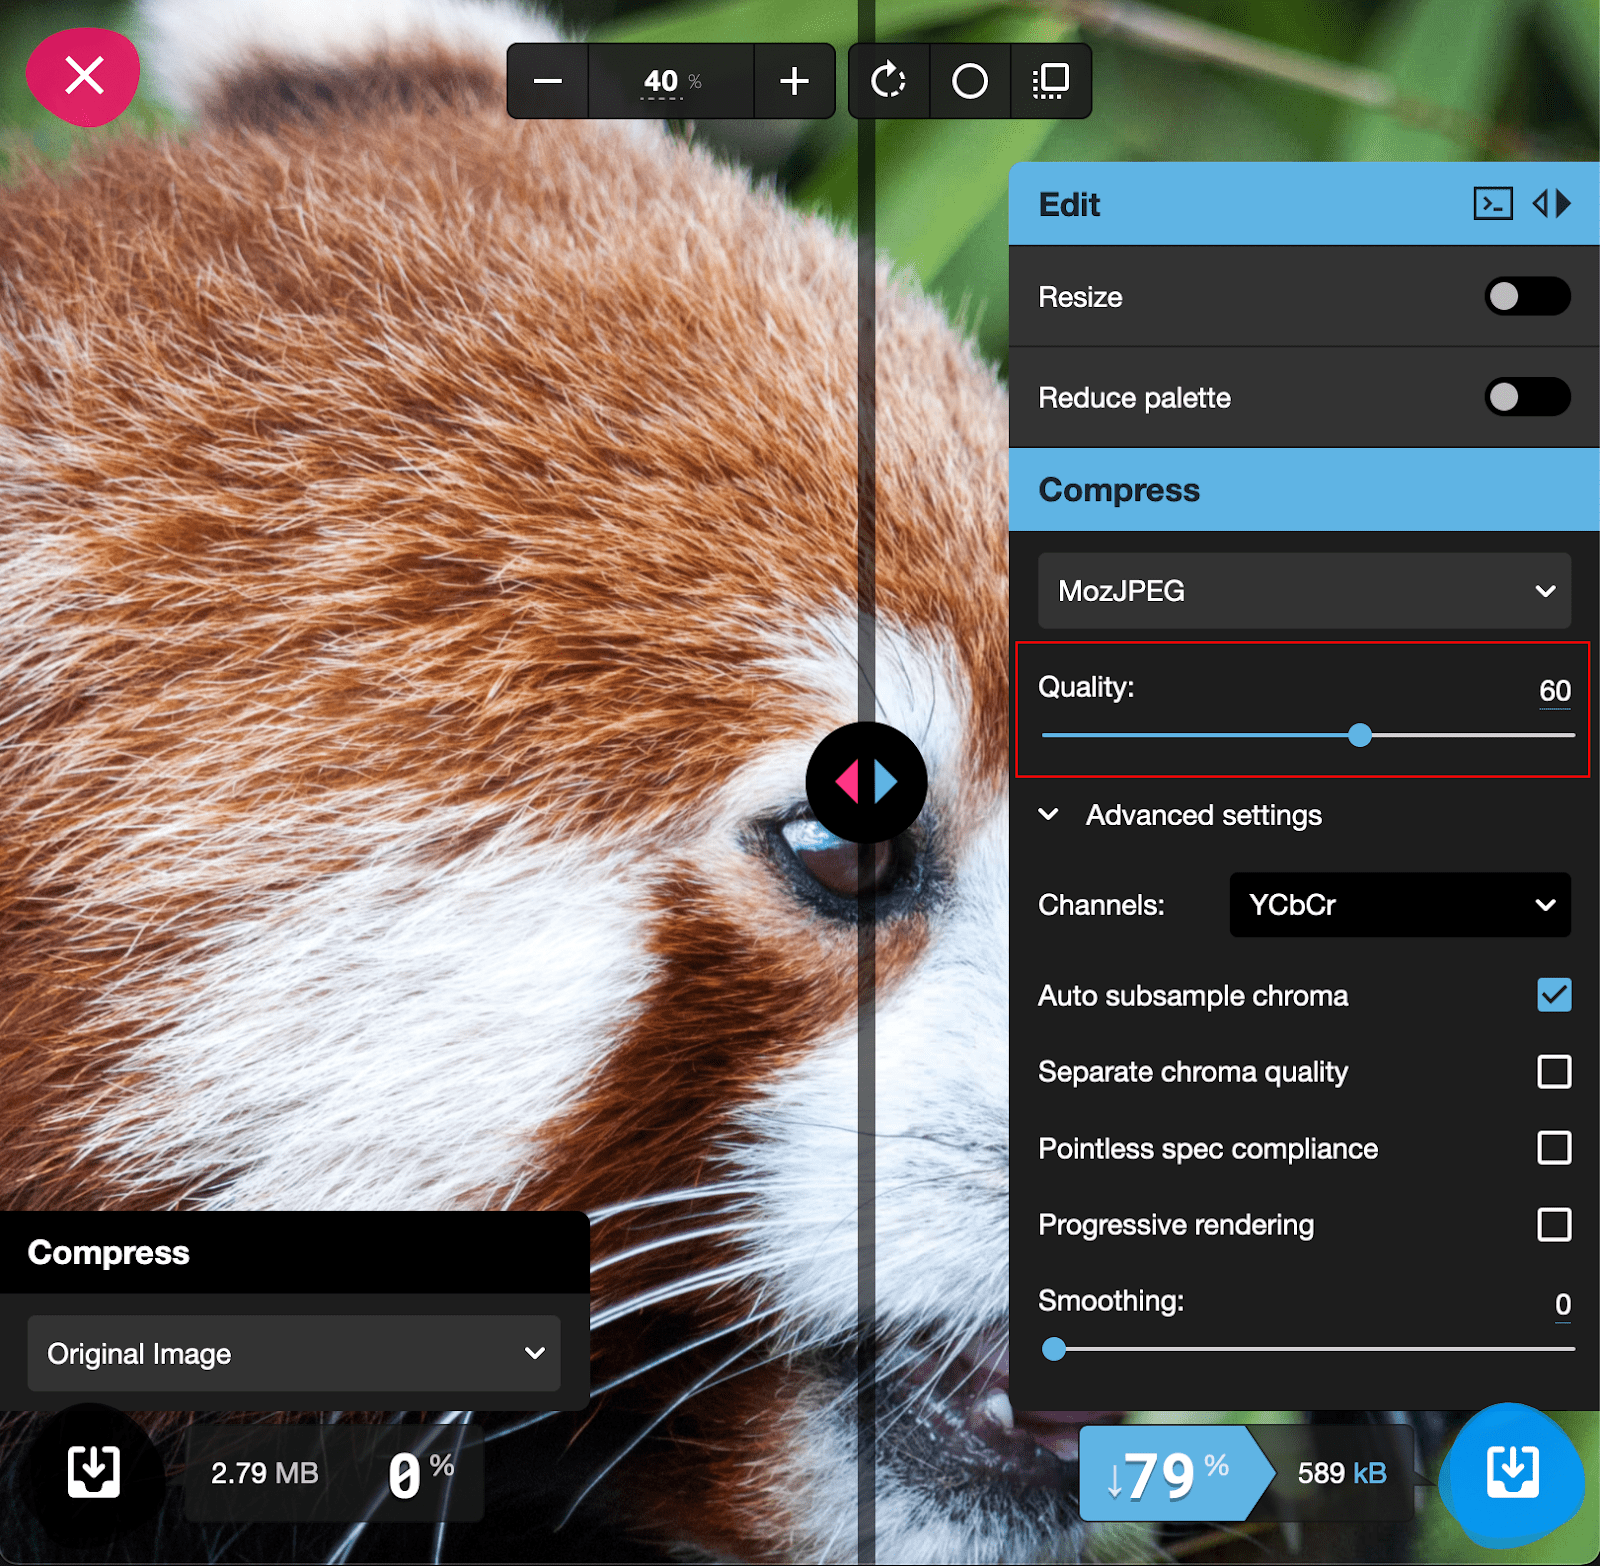 The Squoosh settings panel, with the quality slider highlighted.